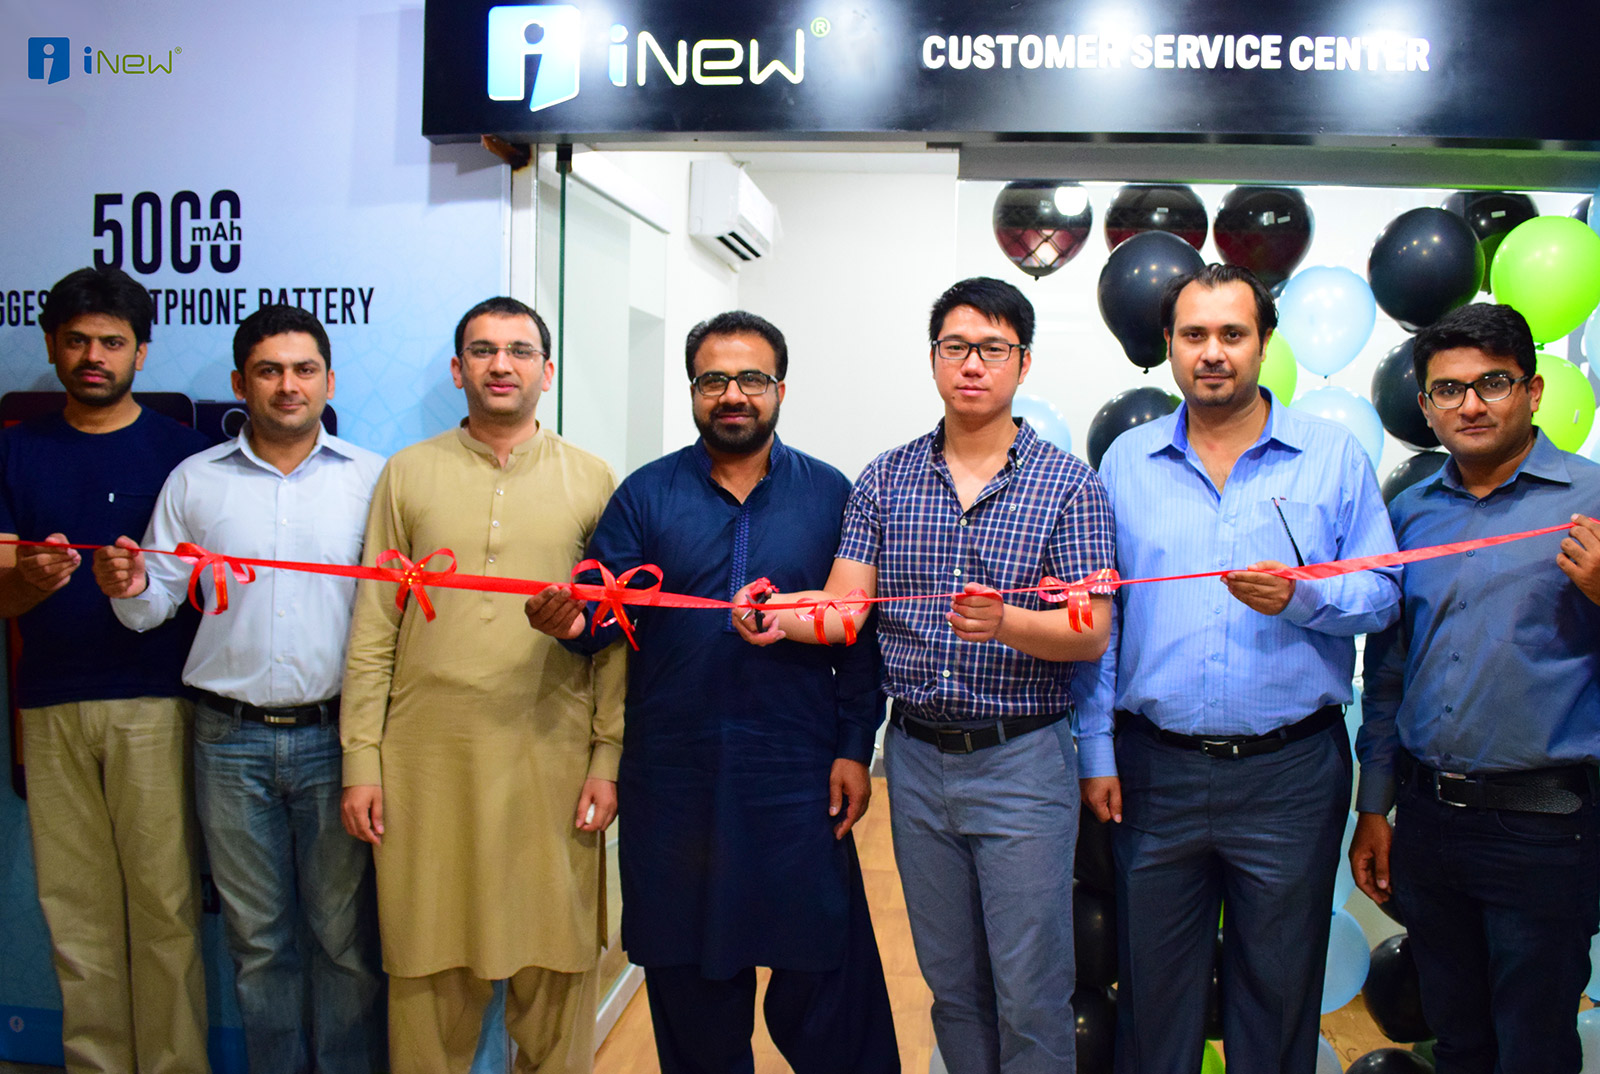 Opening Ceremony of first iNew Customer Service Center